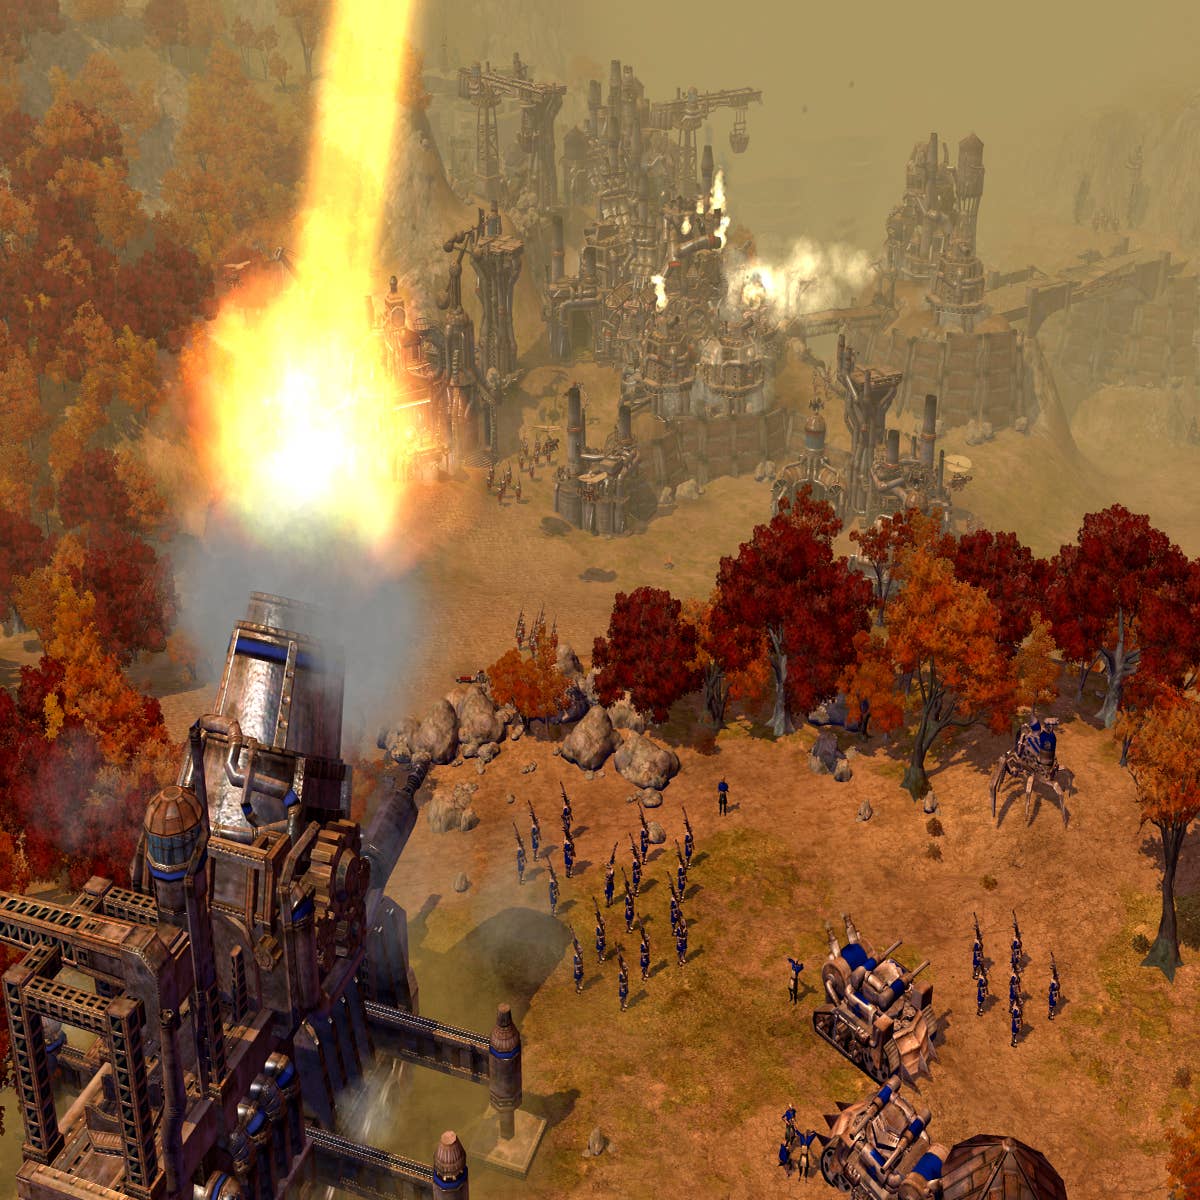 GameSpy: Rise of Nations: Rise of Legends Preview